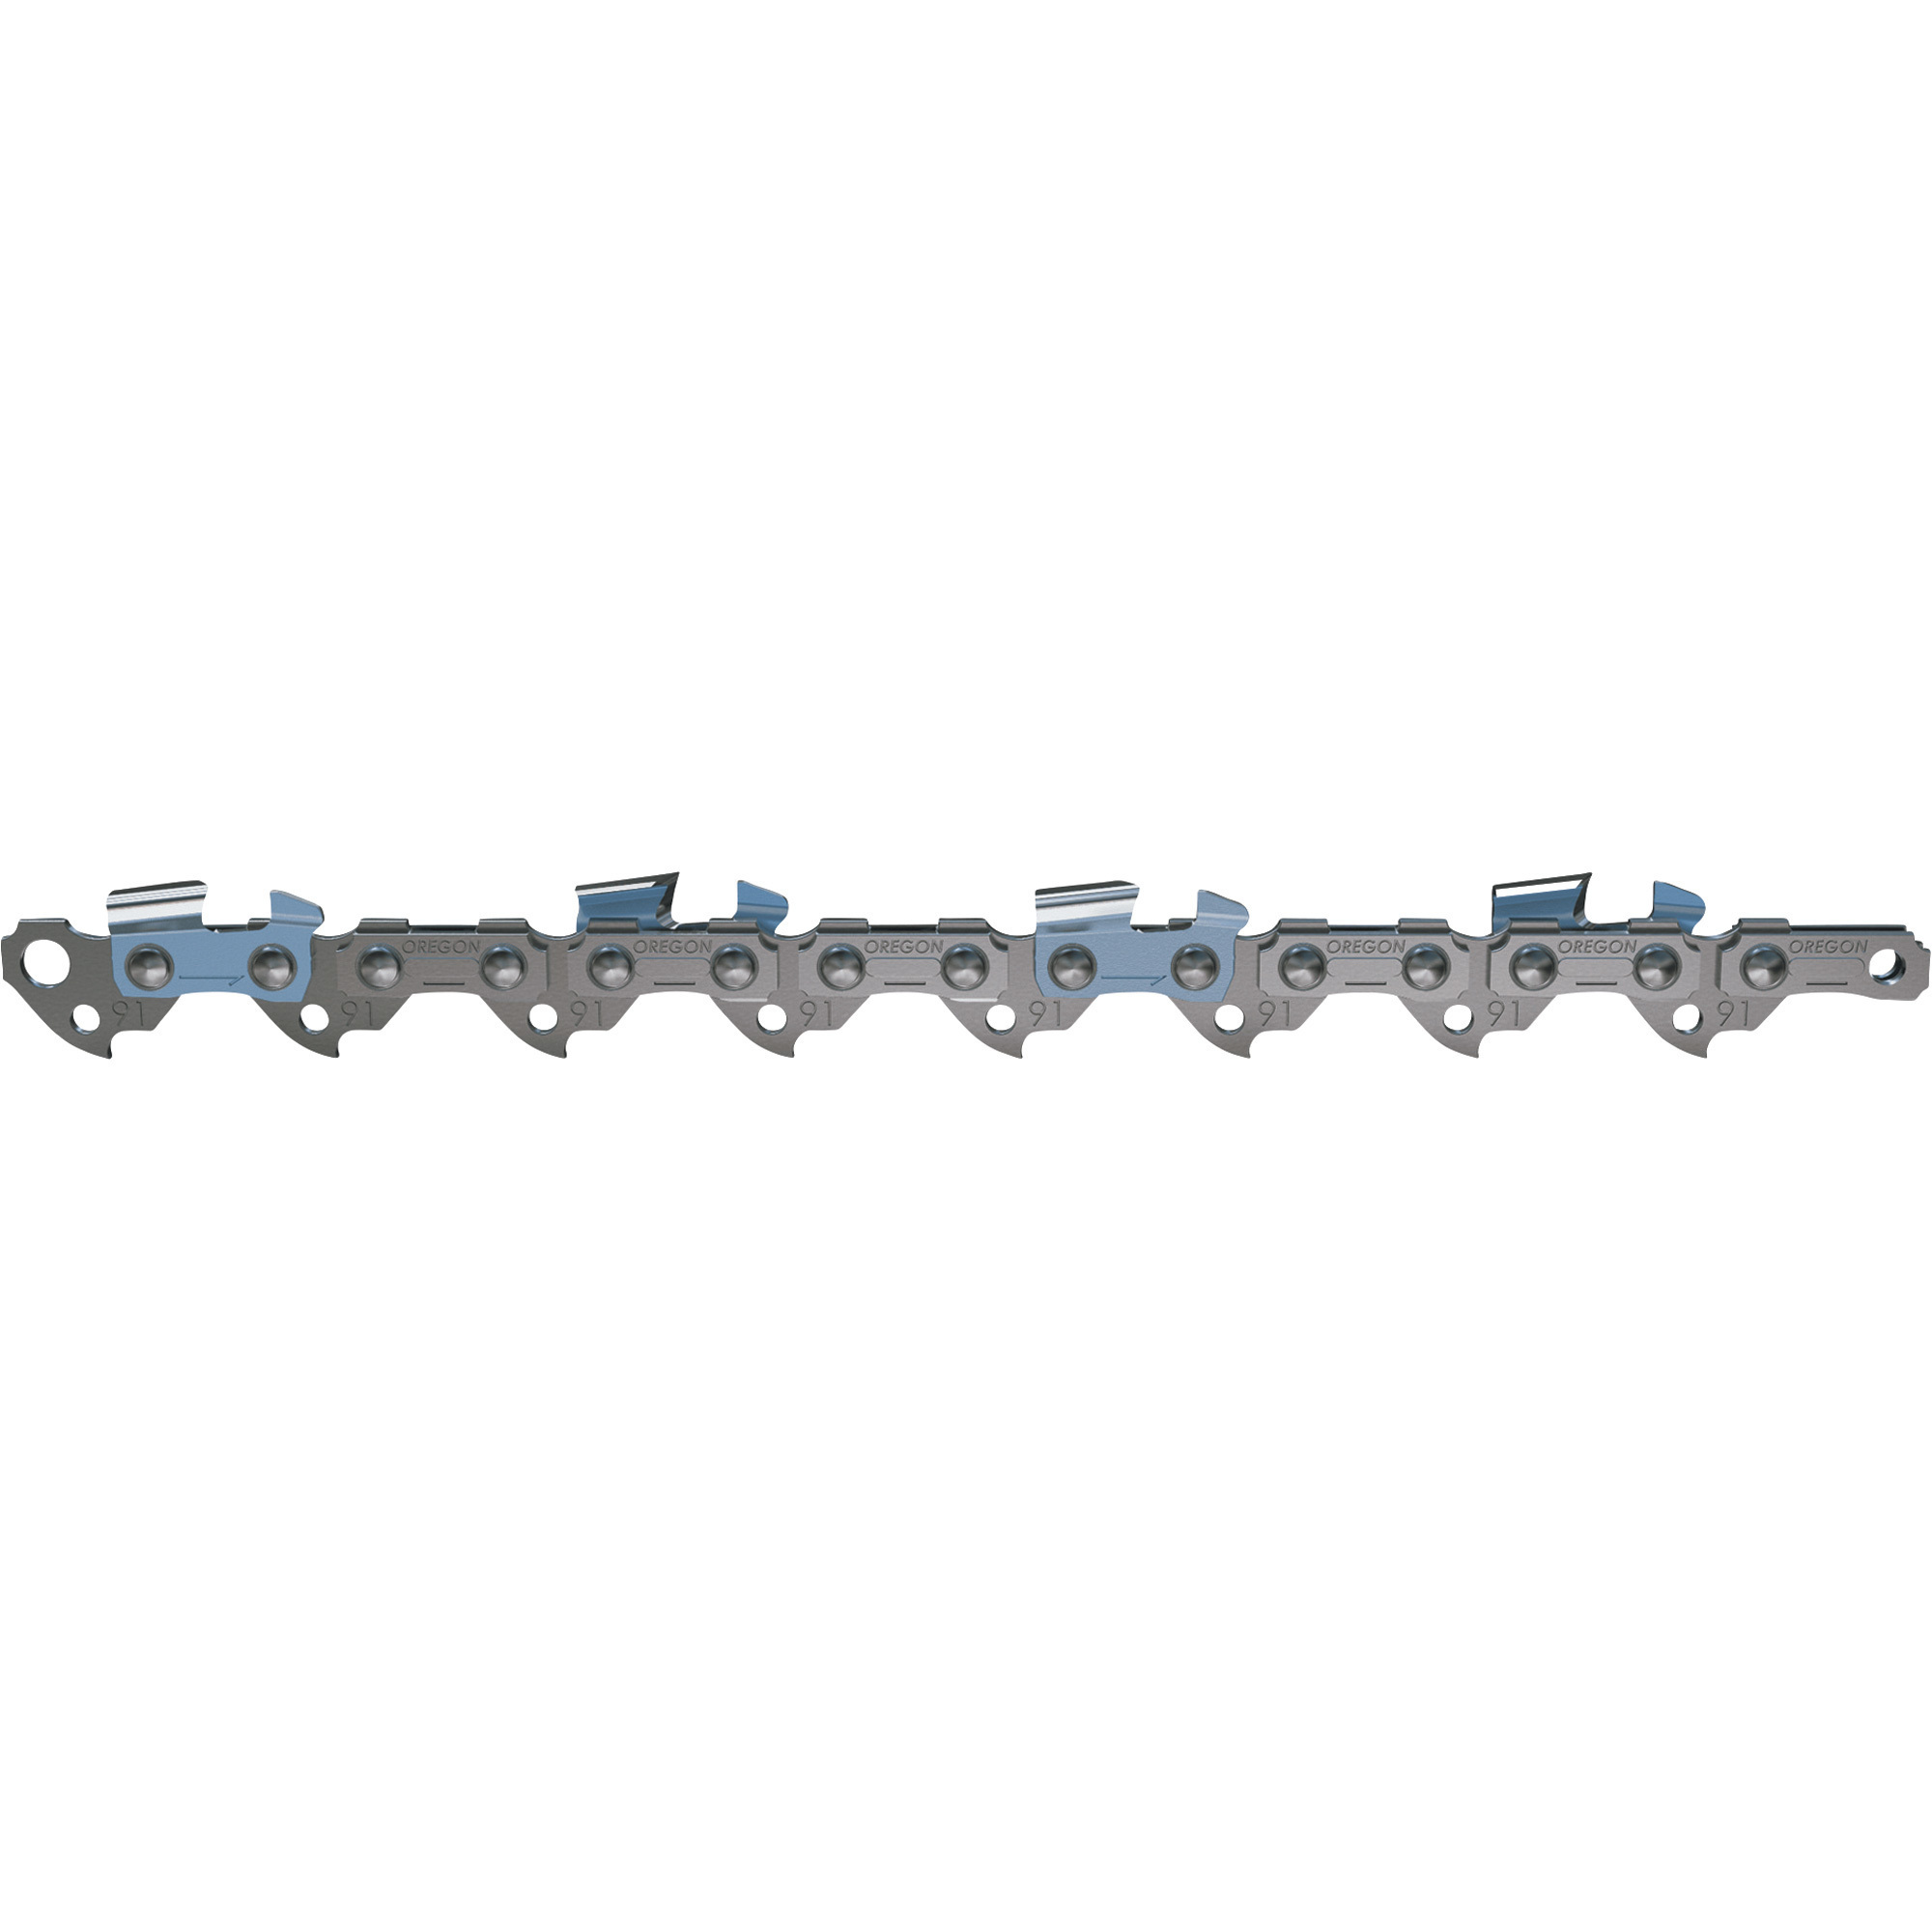 Oregon X-Grind Chainsaw Chain, Long Top Plate, 3/8Inch Low Profile x 0.050Inch, Fits 14Inch Bar, Model T50/91VXL050G